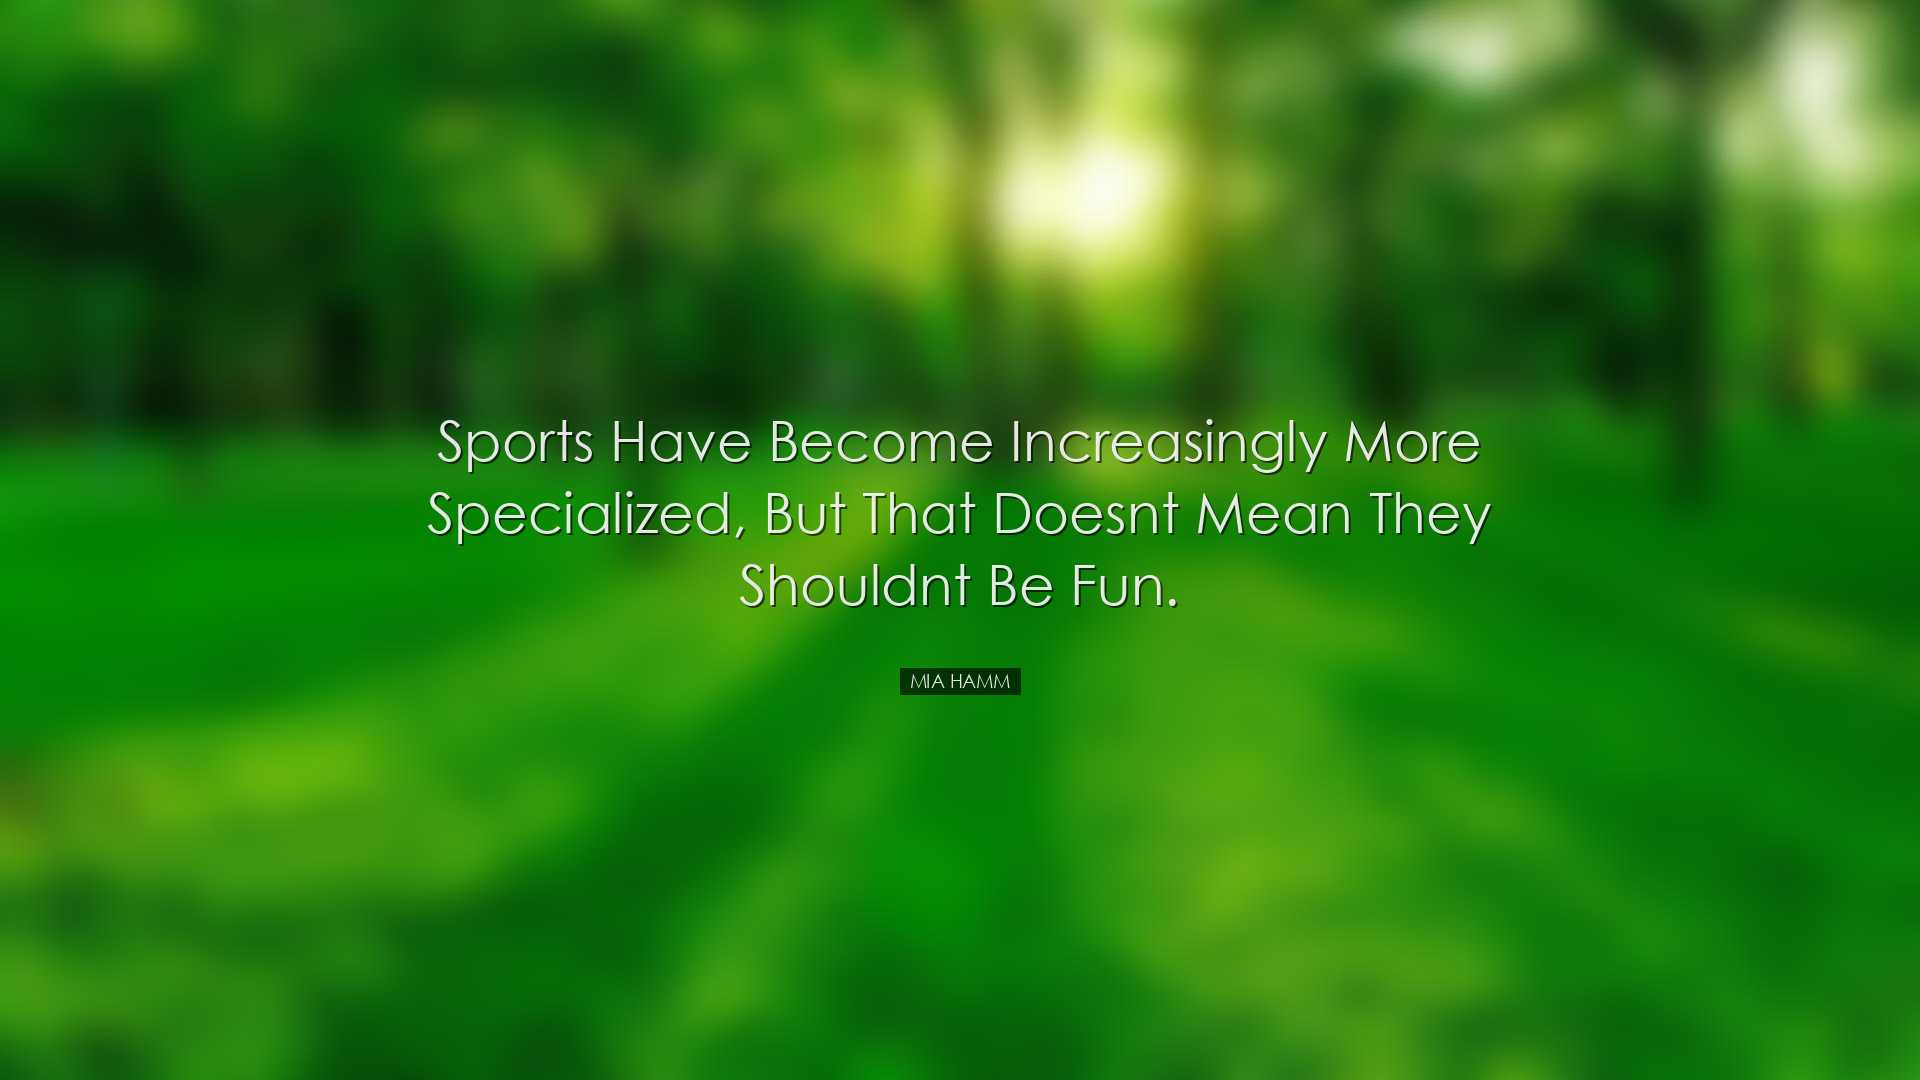 Sports have become increasingly more specialized, but that doesnt